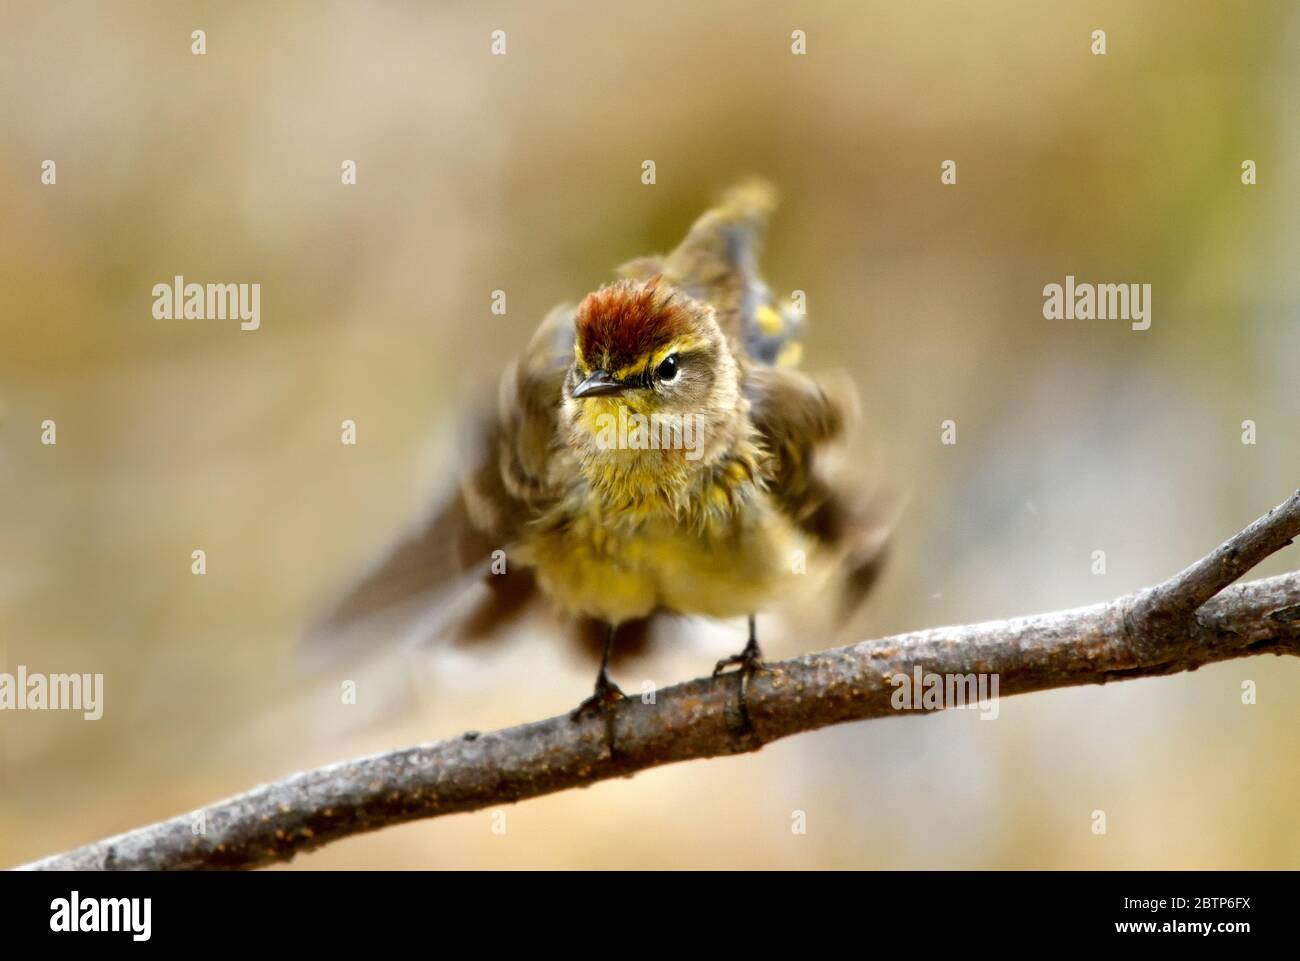 A Palm Warbler ' Dendroica petechia', perched on a branch fluffing his feathers after a bath in acalm pool of water Stock Photo